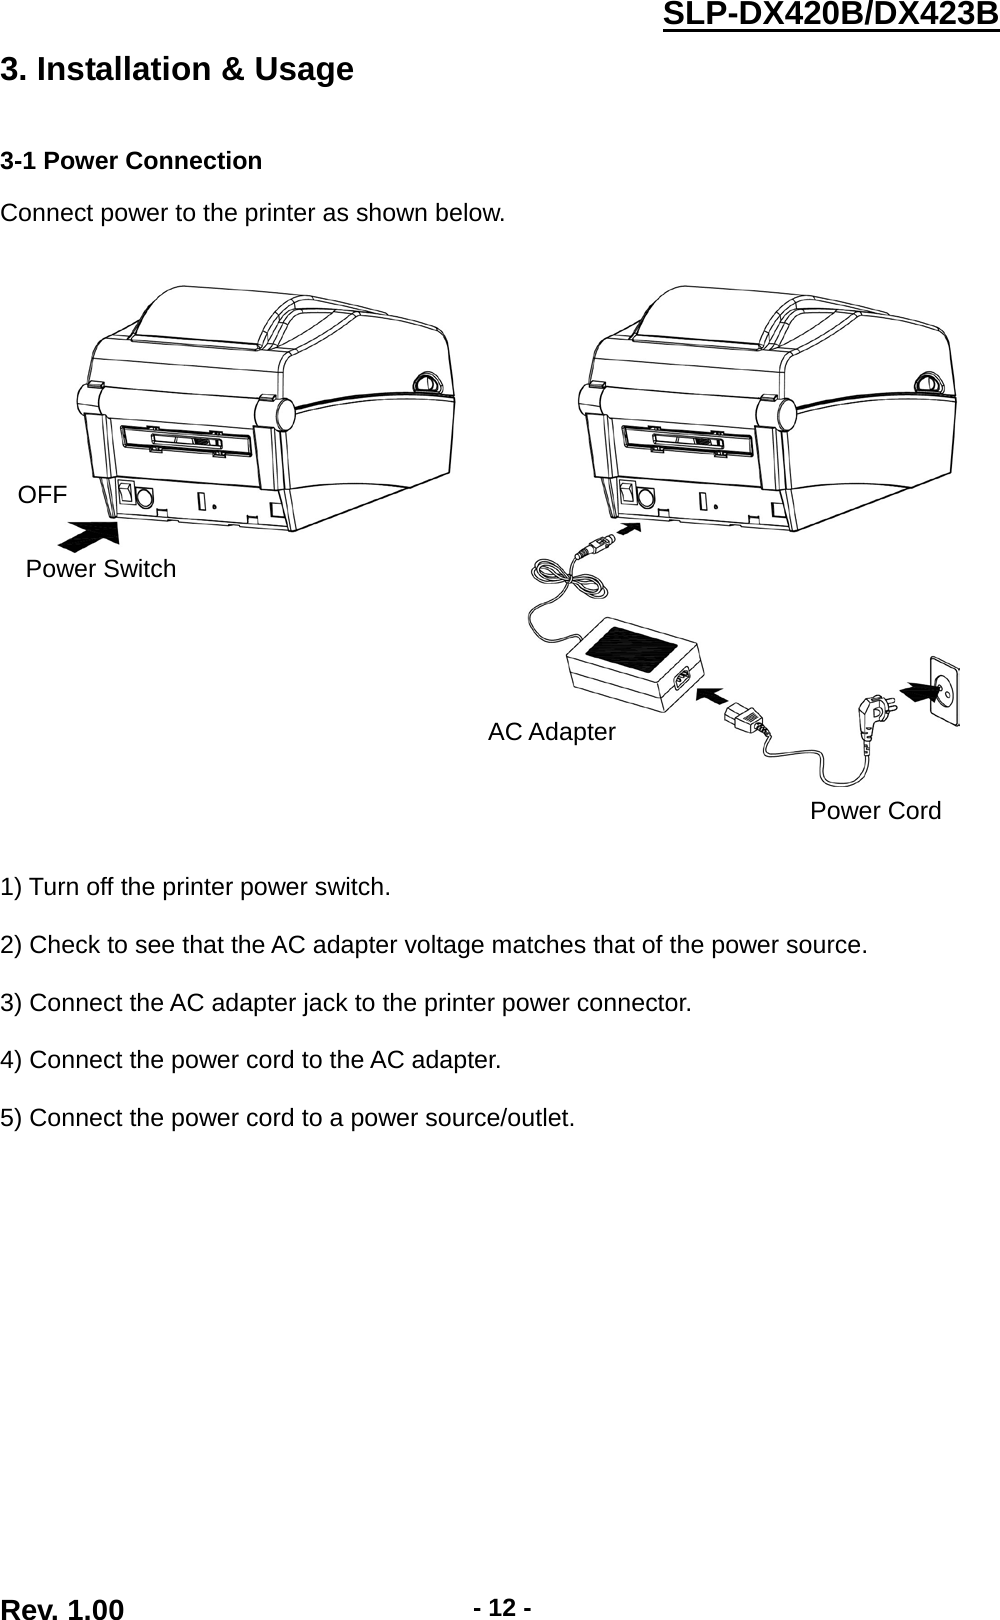  Rev. 1.00 - 12 - SLP-DX420B/DX423B  3. Installation &amp; Usage   3-1 Power Connection  Connect power to the printer as shown below.         1) Turn off the printer power switch.  2) Check to see that the AC adapter voltage matches that of the power source.  3) Connect the AC adapter jack to the printer power connector.  4) Connect the power cord to the AC adapter.  5) Connect the power cord to a power source/outlet. OFF Power Switch Power Cord AC Adapter 